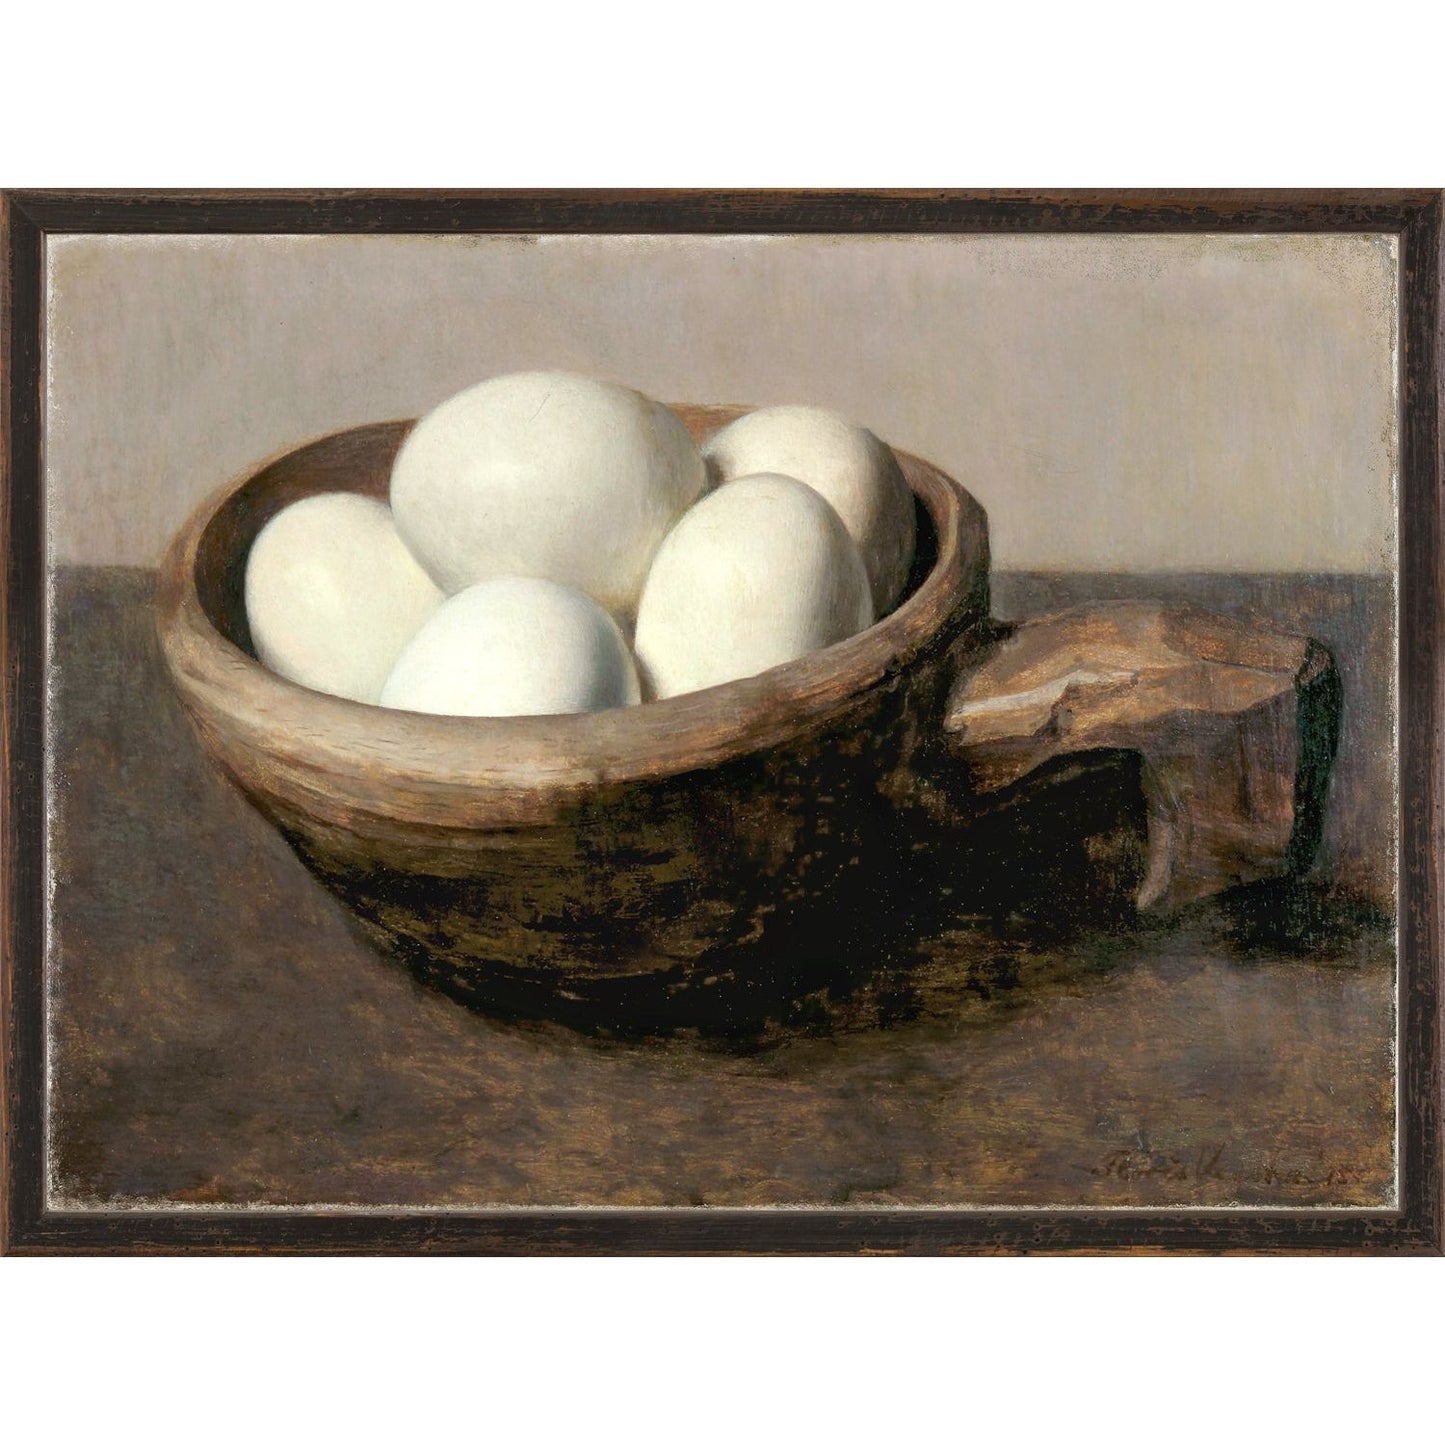 Collection 23 - Nap with Eggs C. 1915 - Small